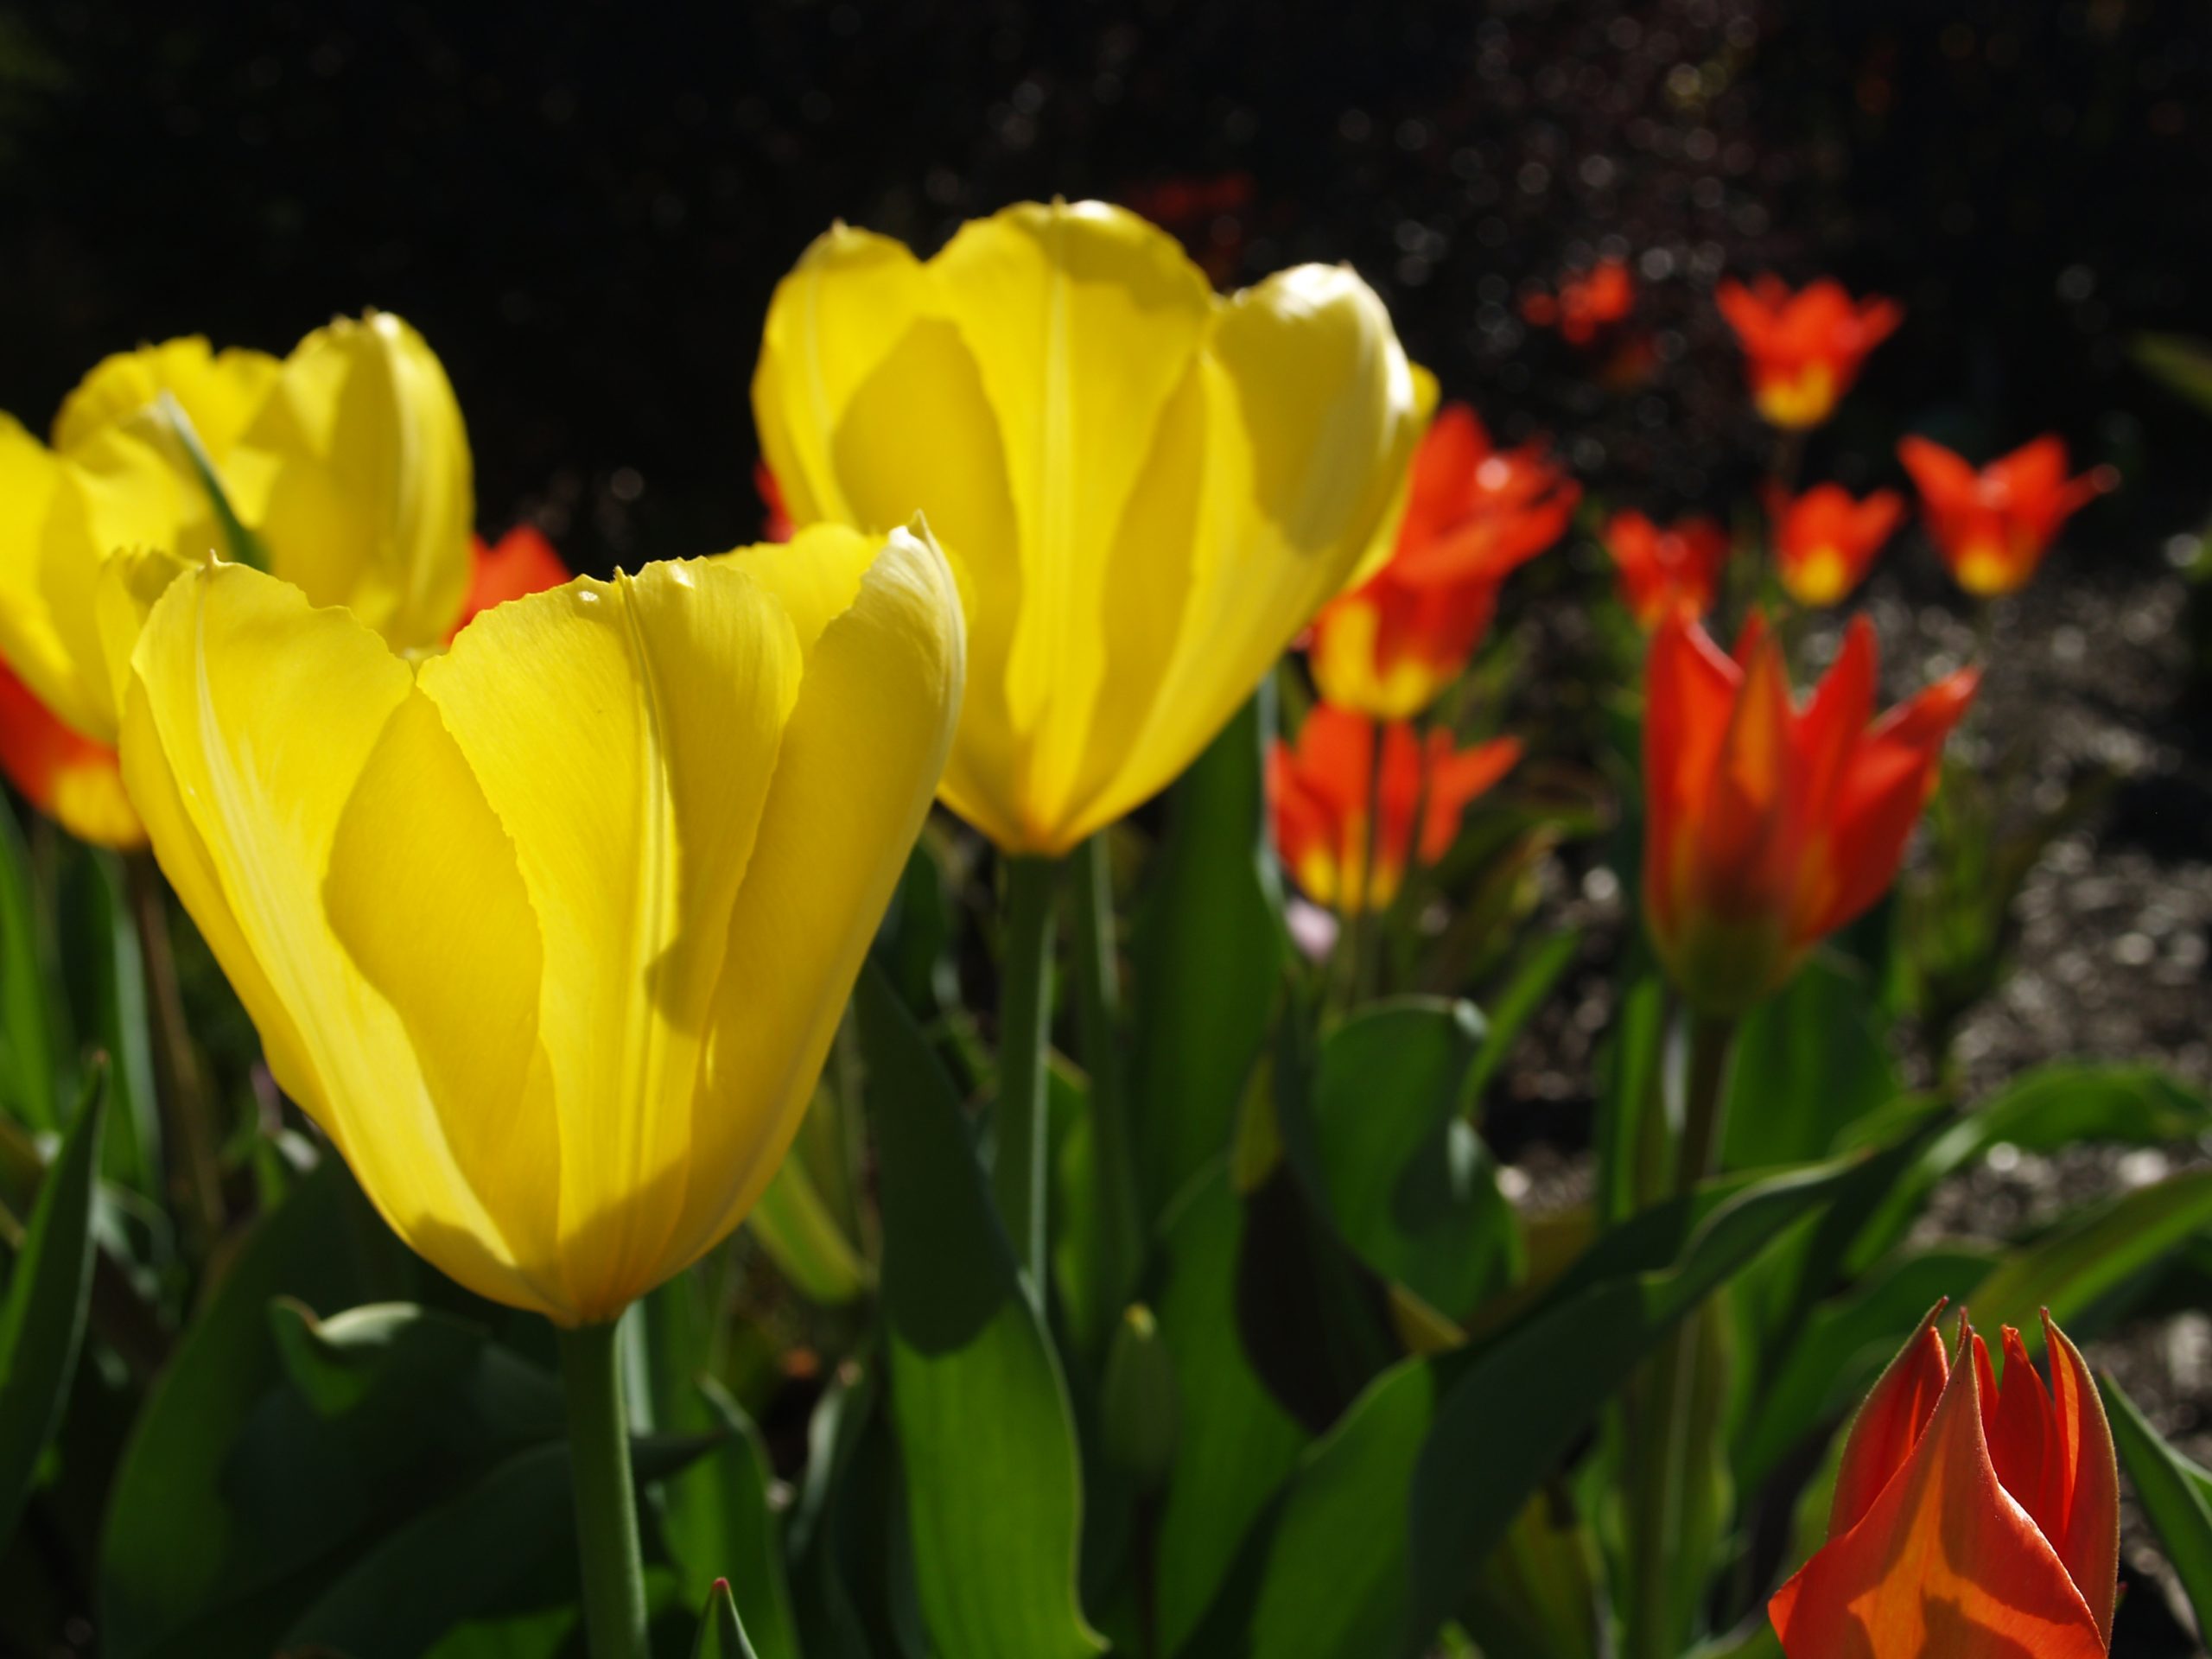 Tulips (user submitted)